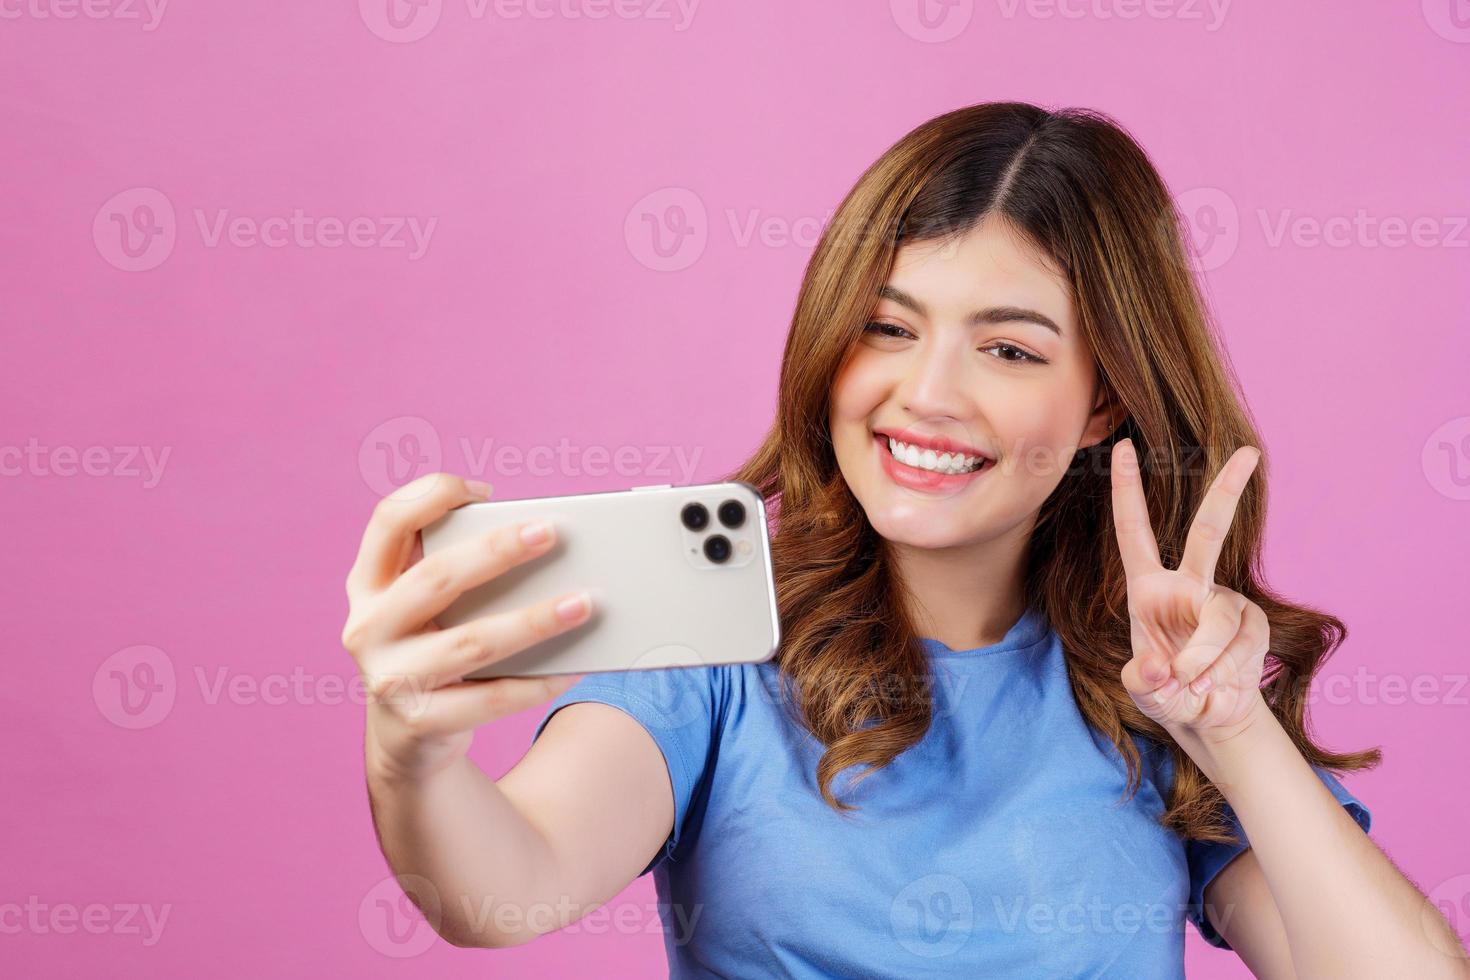 Portrait of happy smiling young woman wearing casual t-shirt selfie with smartphone isolated over pink background photo